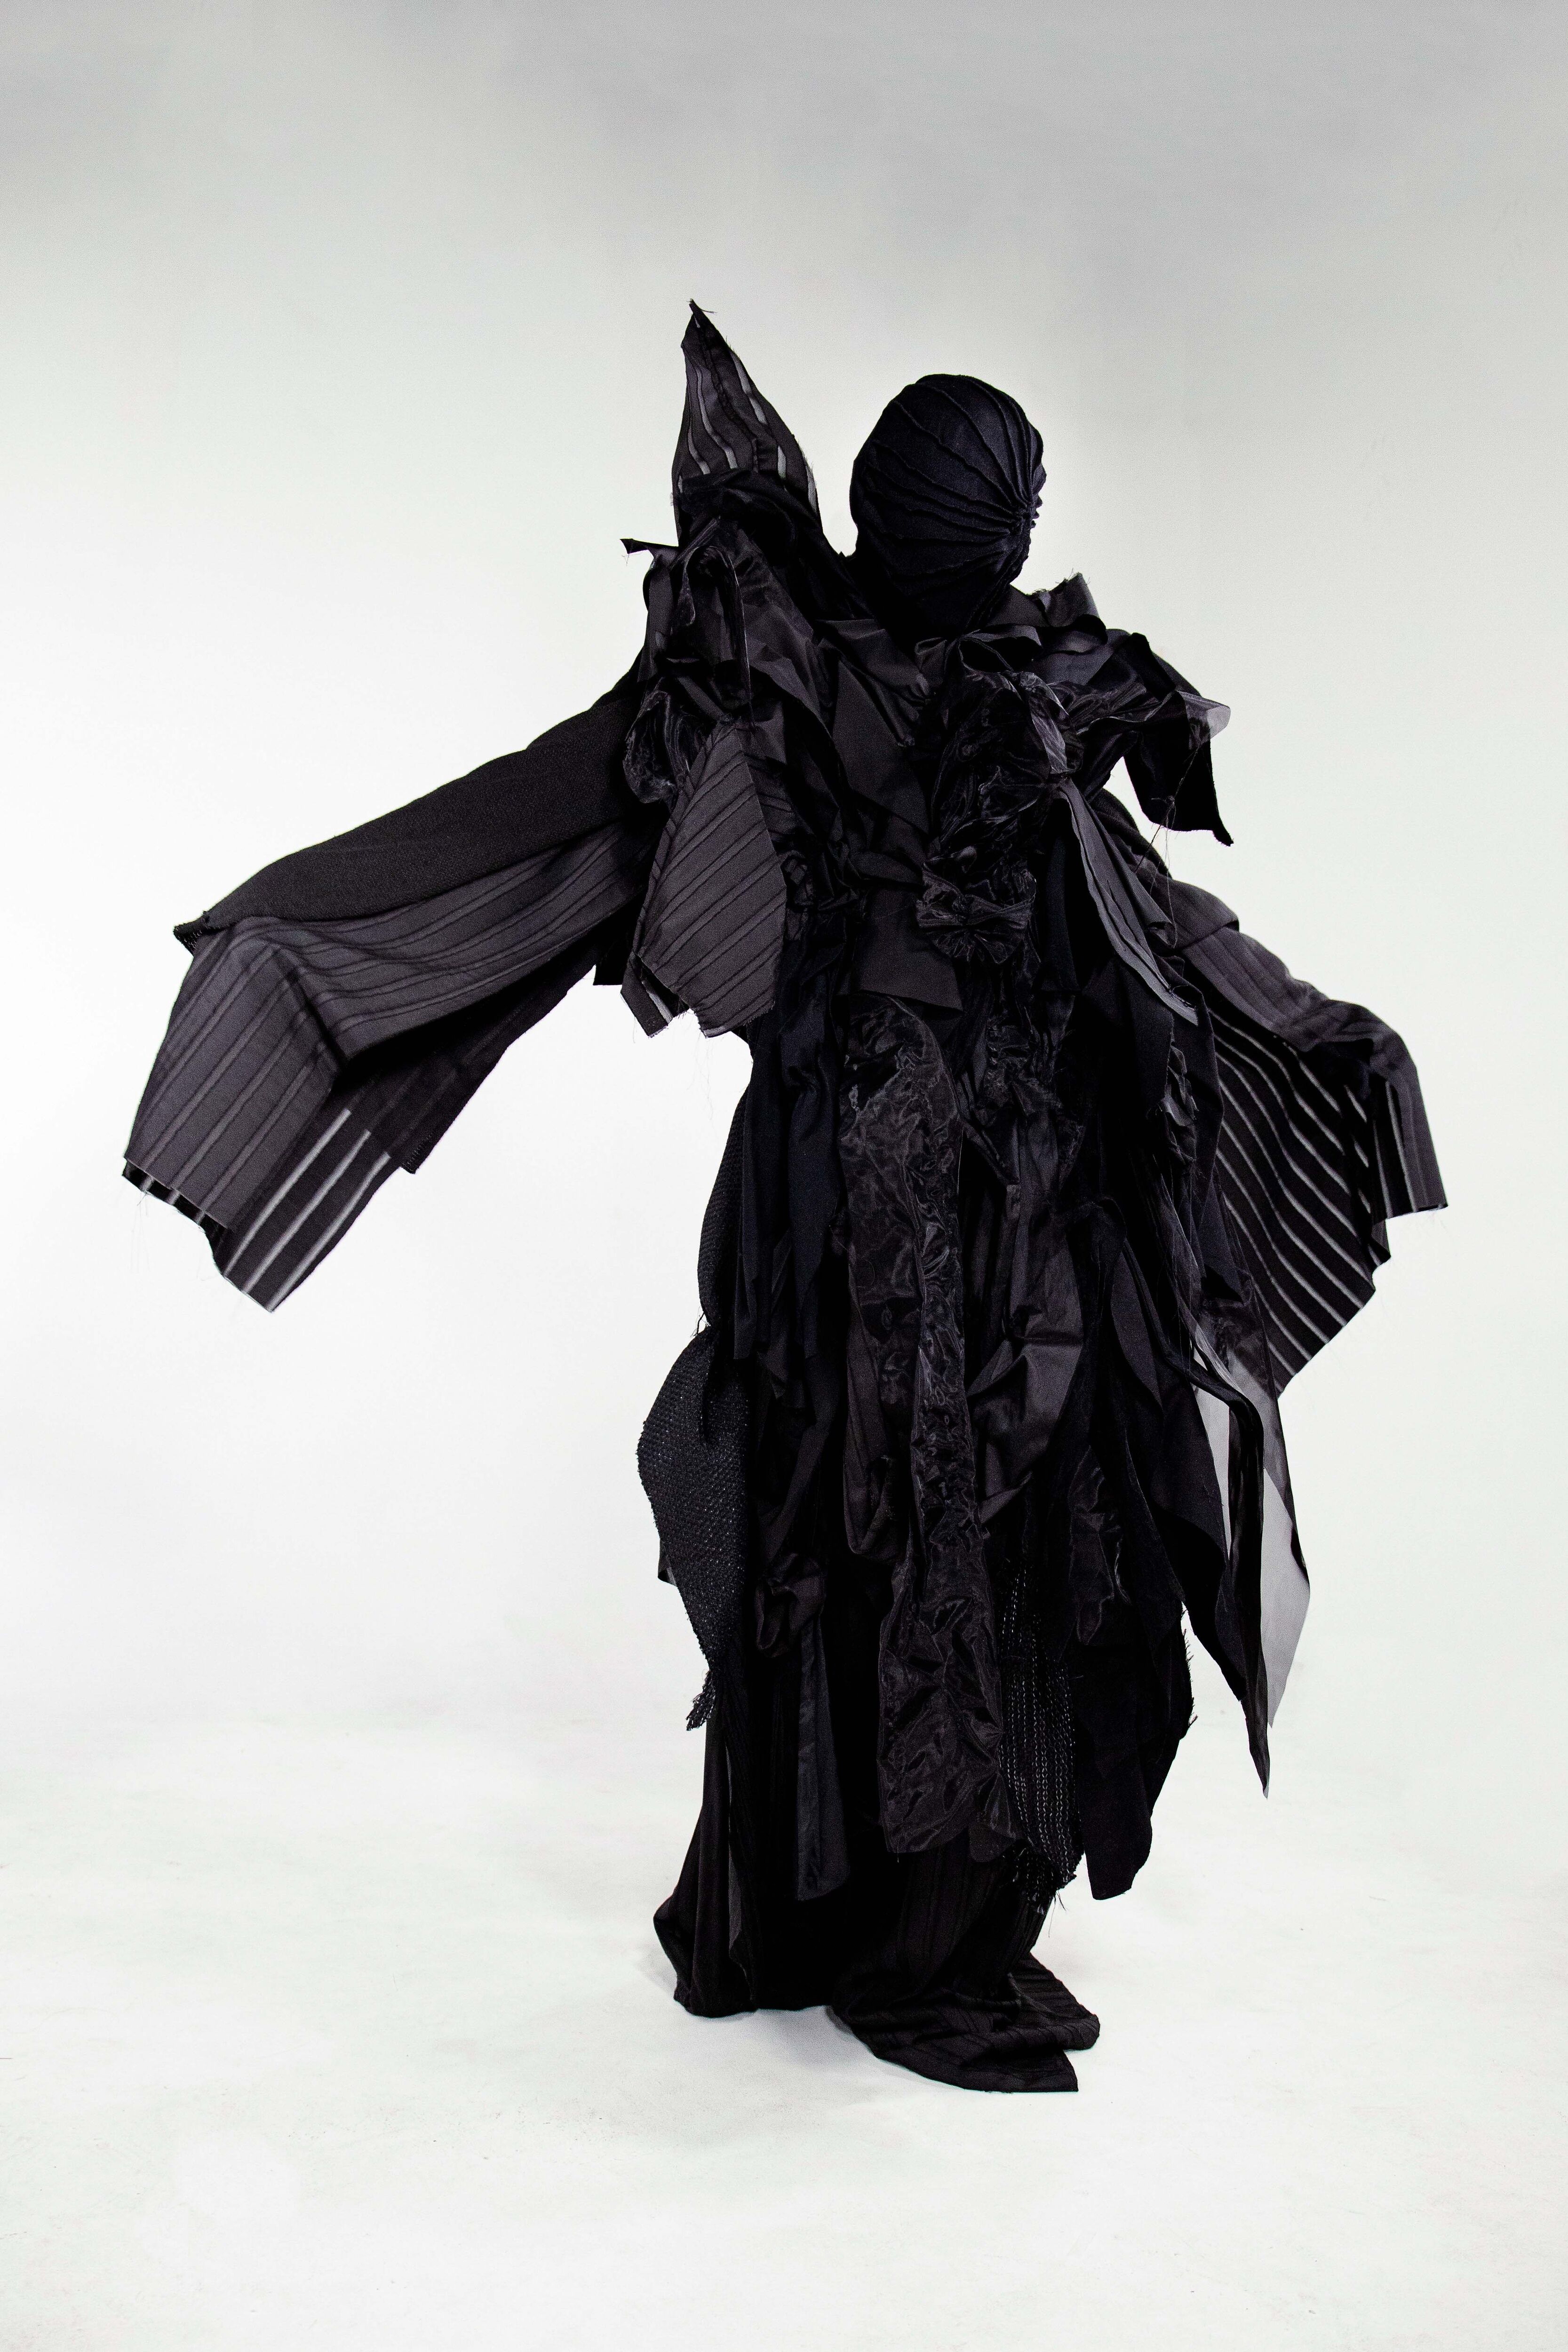 An individual shrouded in a voluminous black fabric outfit, presenting a dramatic and artistic silhouette with hidden features.